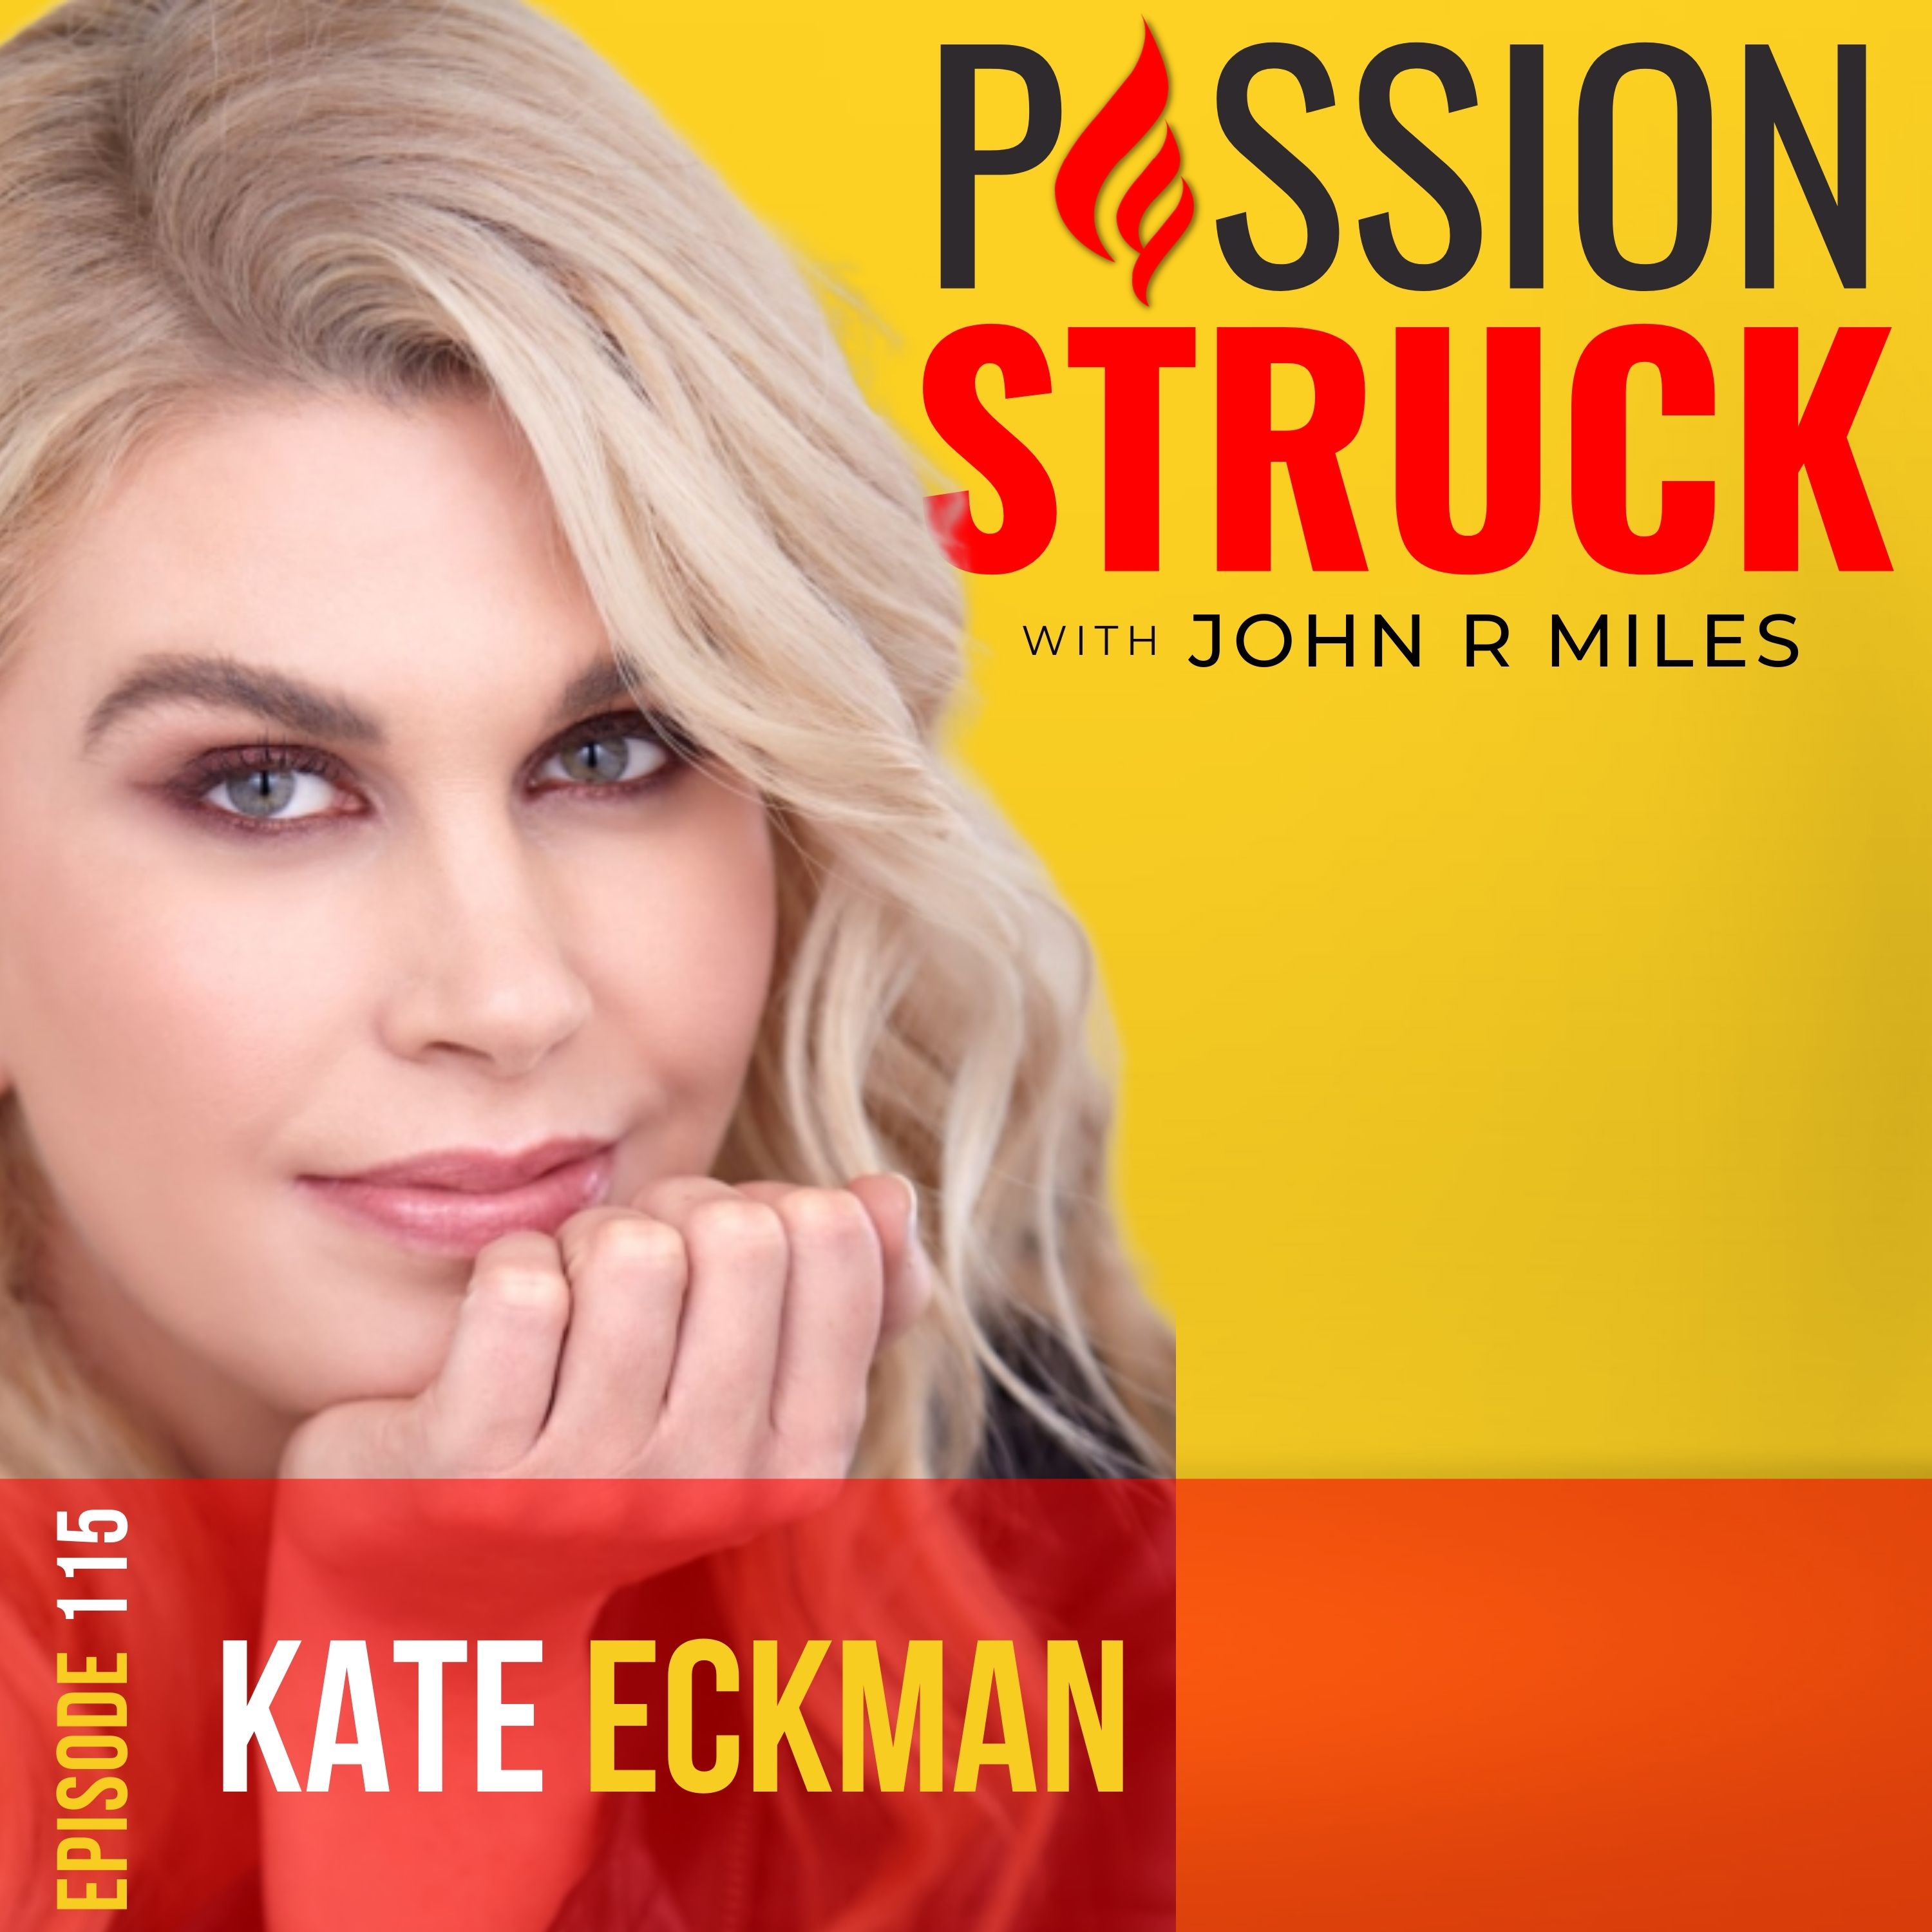 Passion Struck with John R. Miles album cover for episode 115 with Kate Eckman